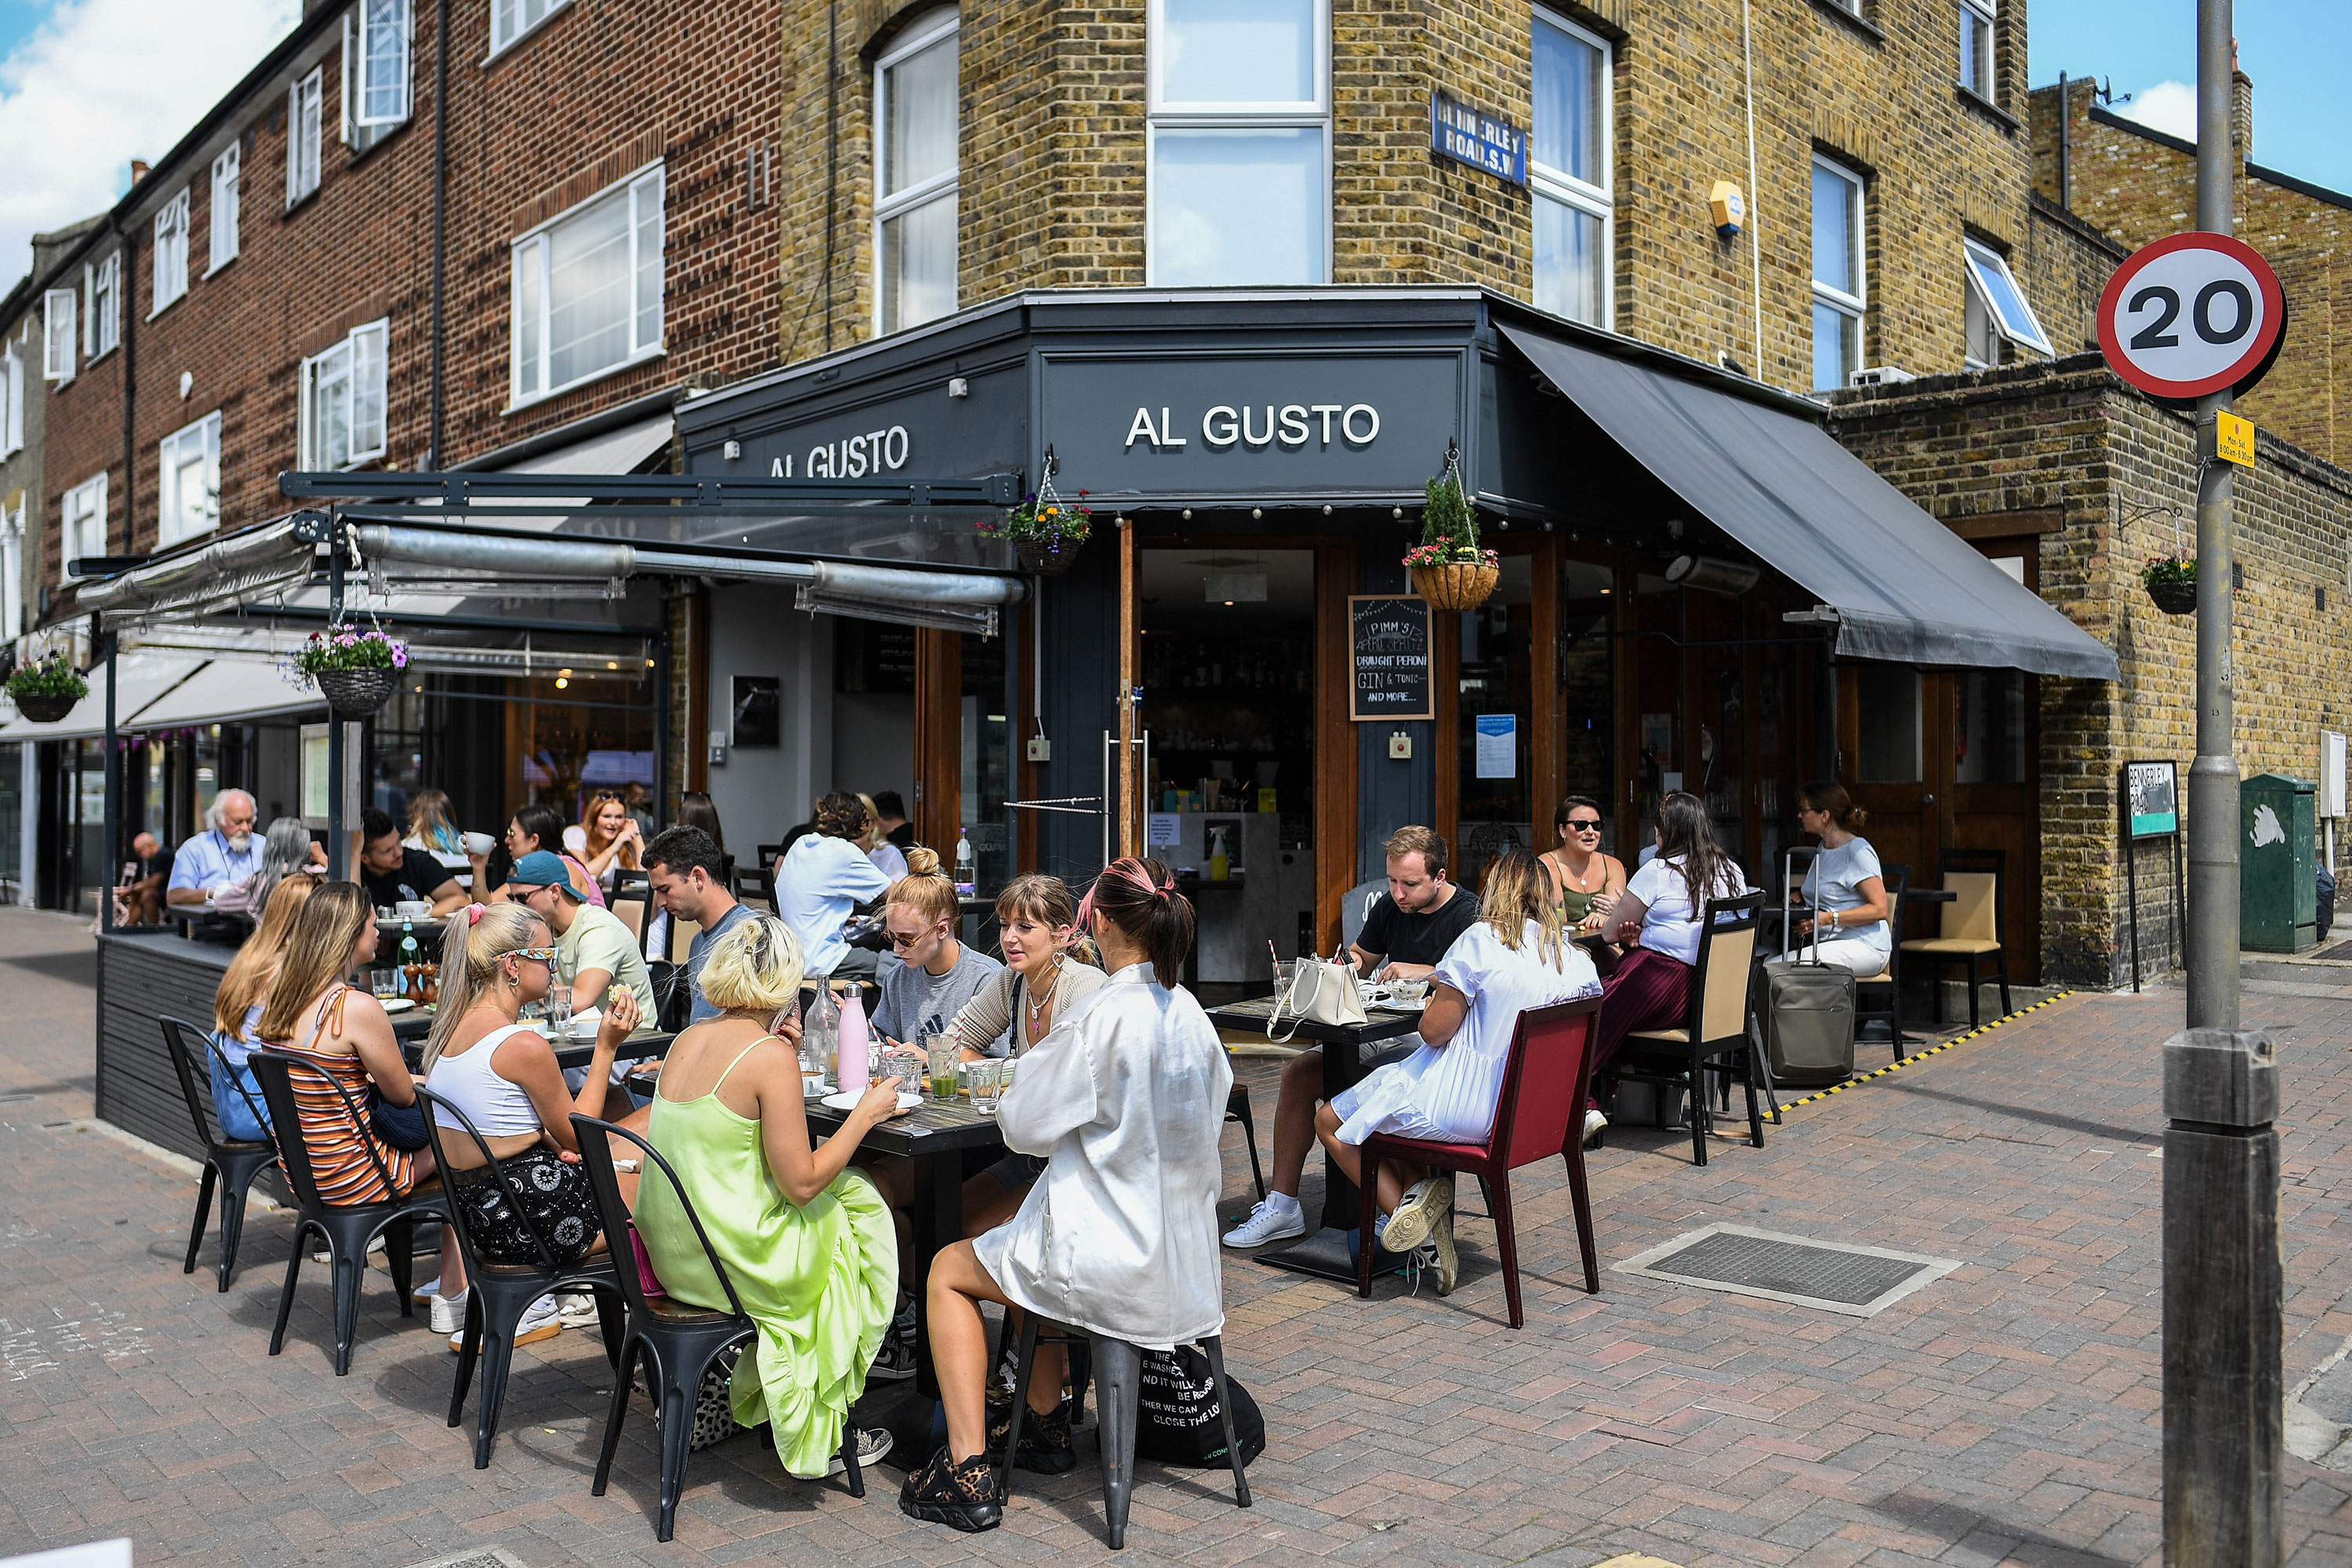 People dine outdoors at a restaurant in Clapham, London, on August 2.